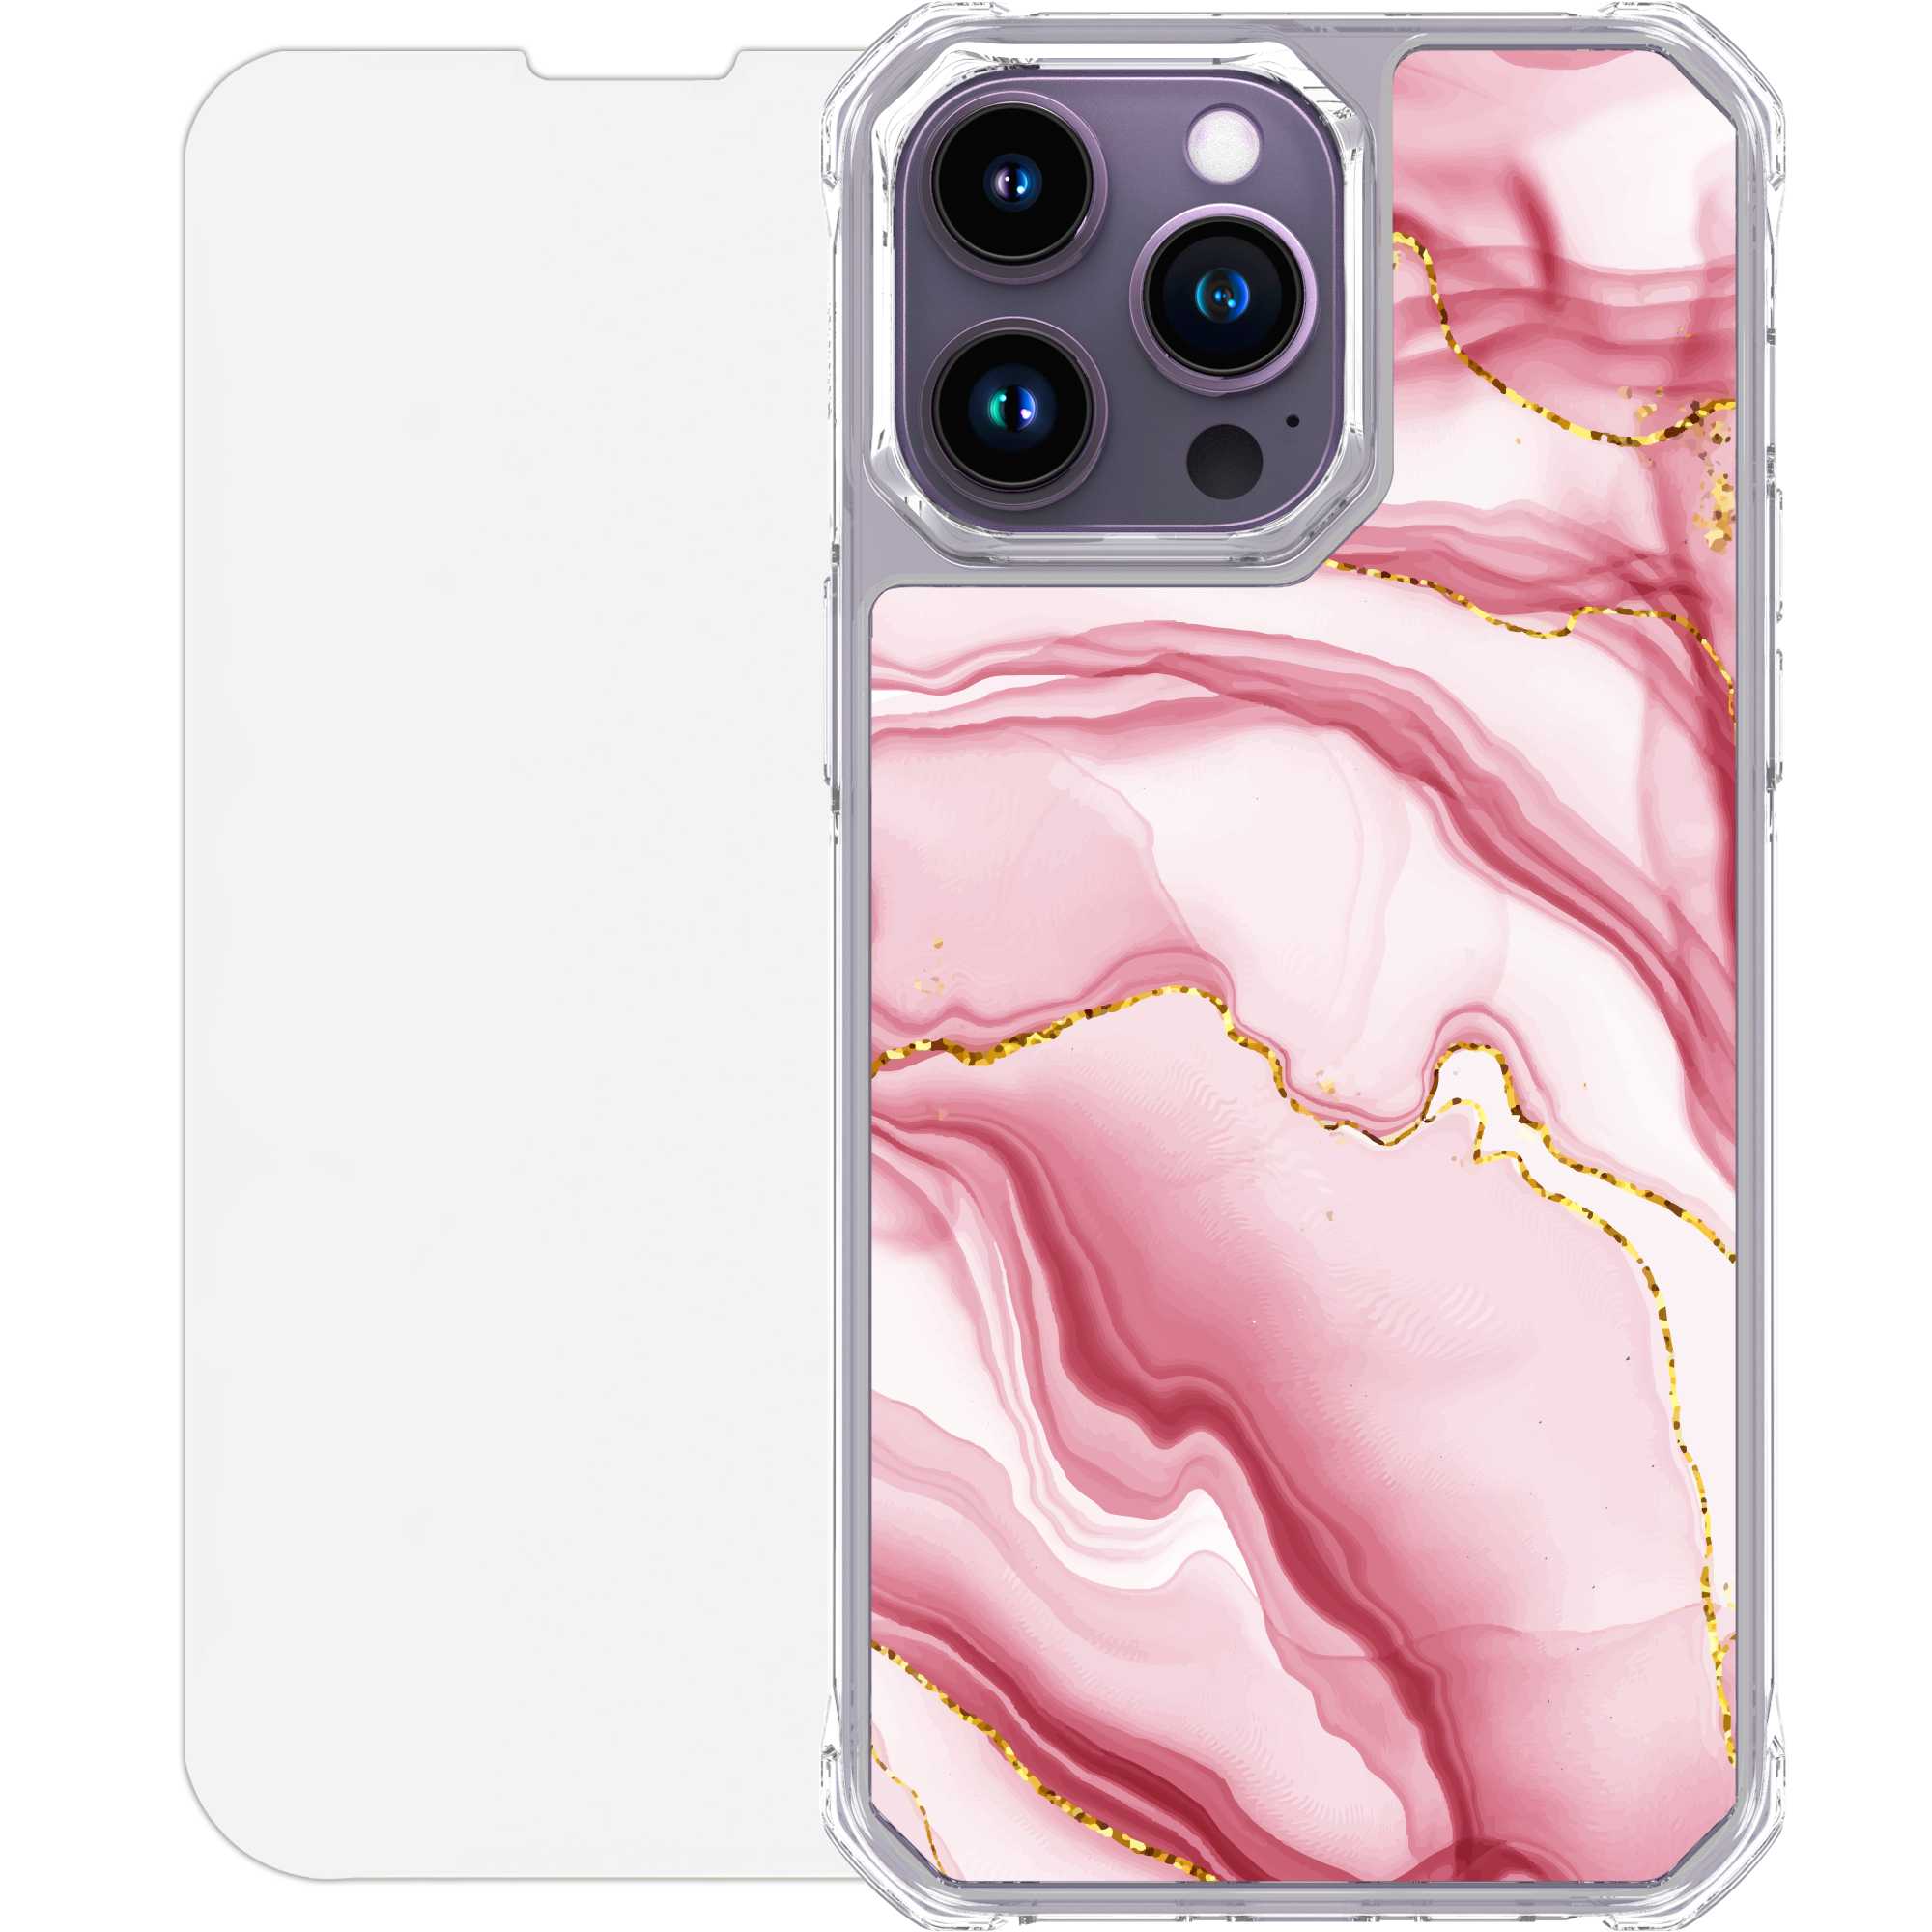 Scooch CrystalCase for iPhone 14 Pro Max BlushMarble Scooch CrystalCase